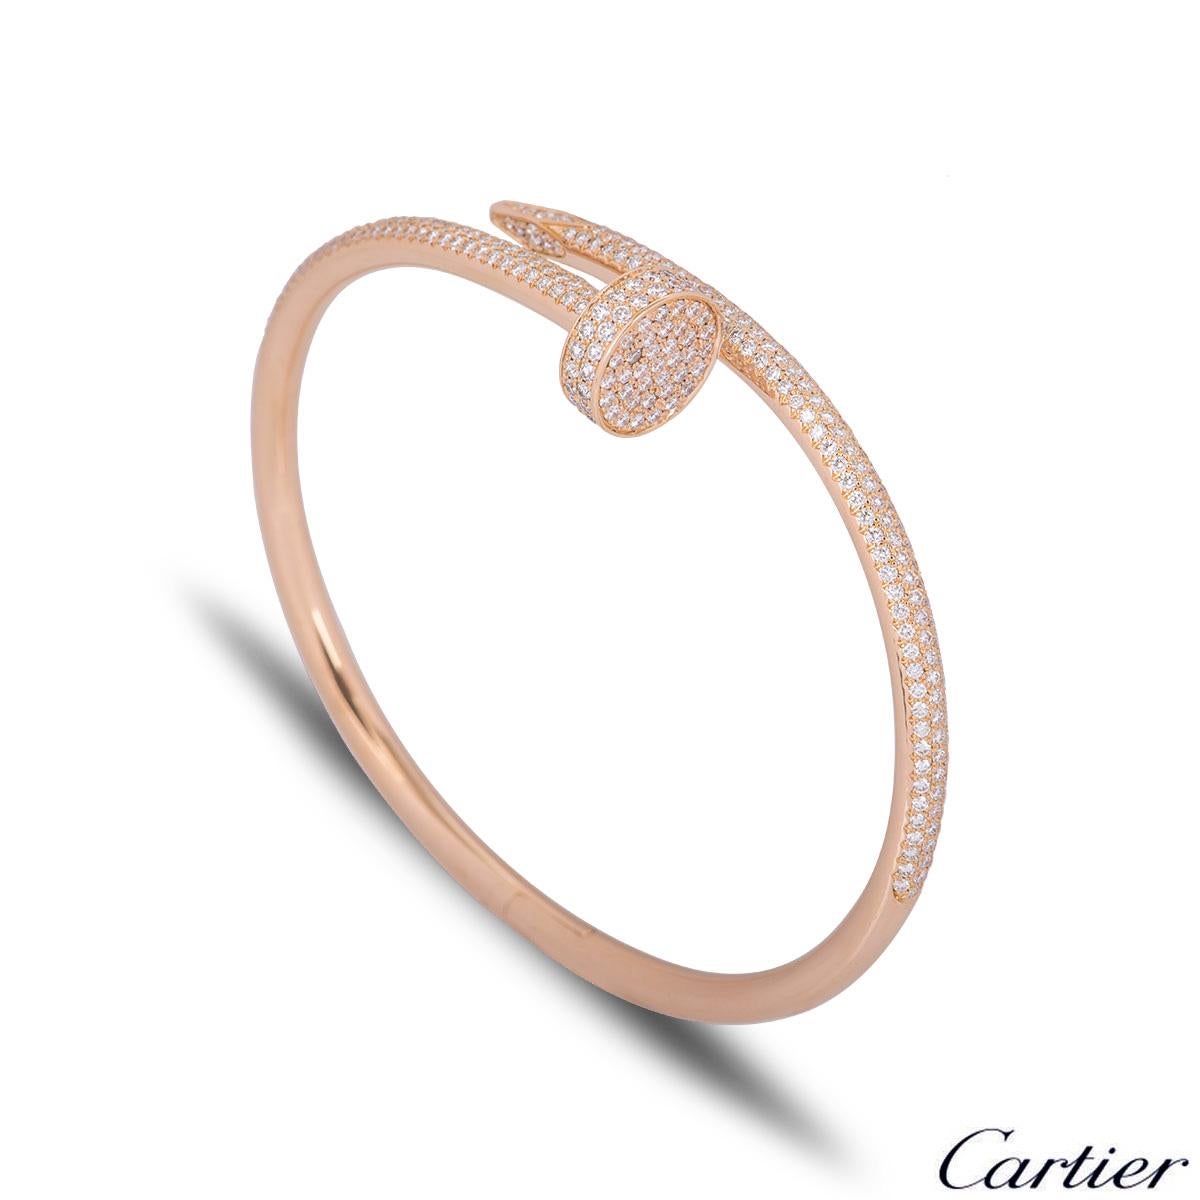 A stunning 18k rose gold diamond bangle by Cartier from the Juste Un Clou collection. The bangle is of a nail design, fully pave set around the outer side with 374 round brilliant cut diamonds totalling 2.26ct. The bangle measures 3.5mm at the